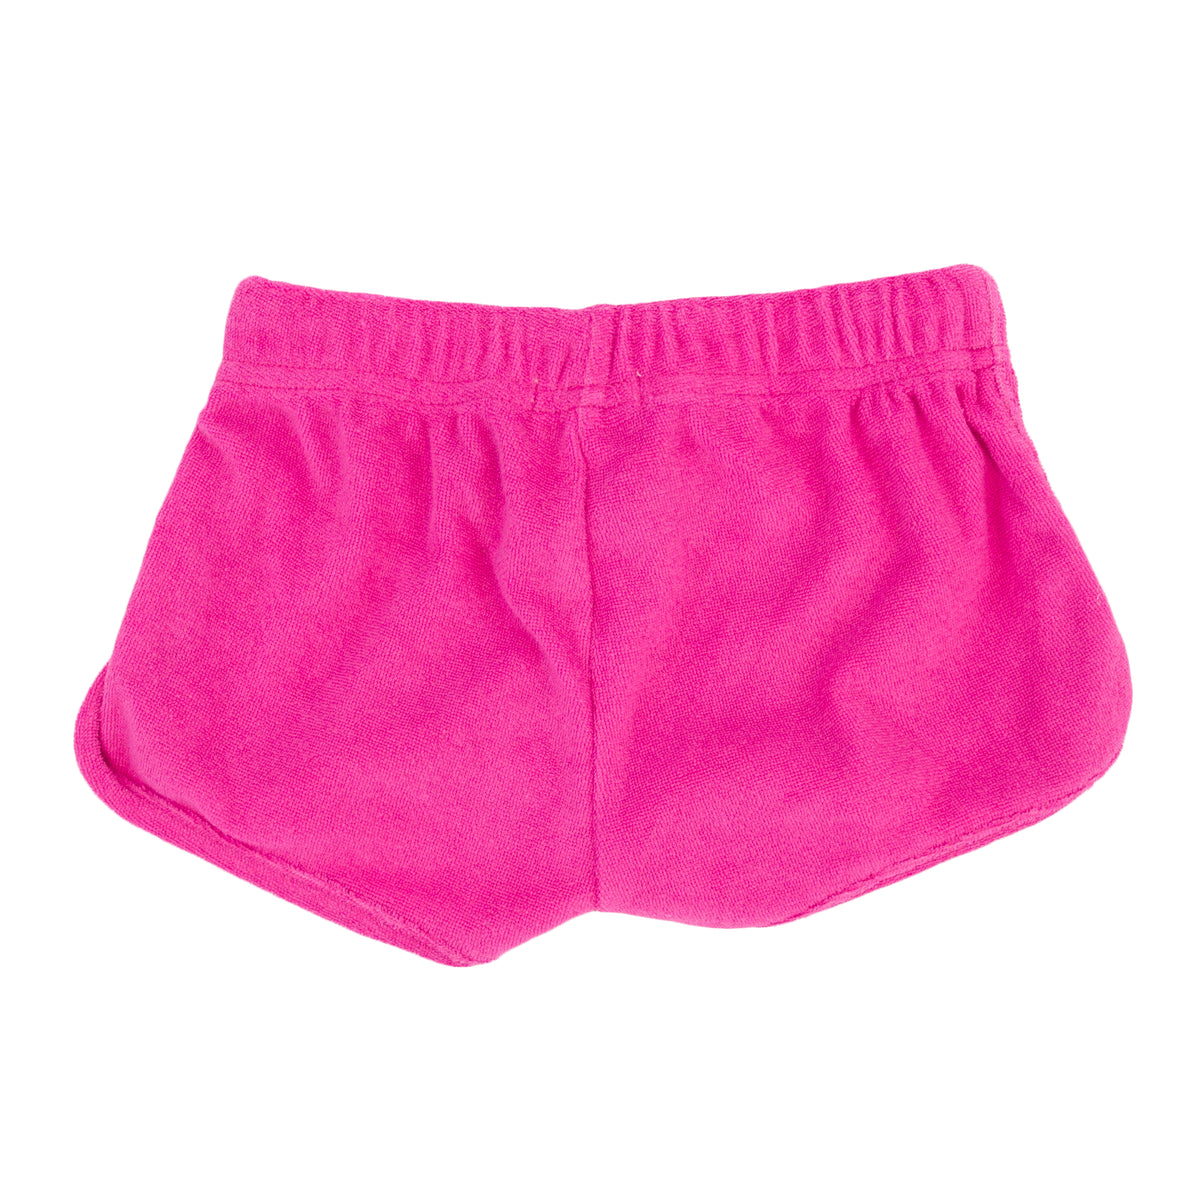 oh baby! Drawstring Shorter Track Shorts - Cotton Candy